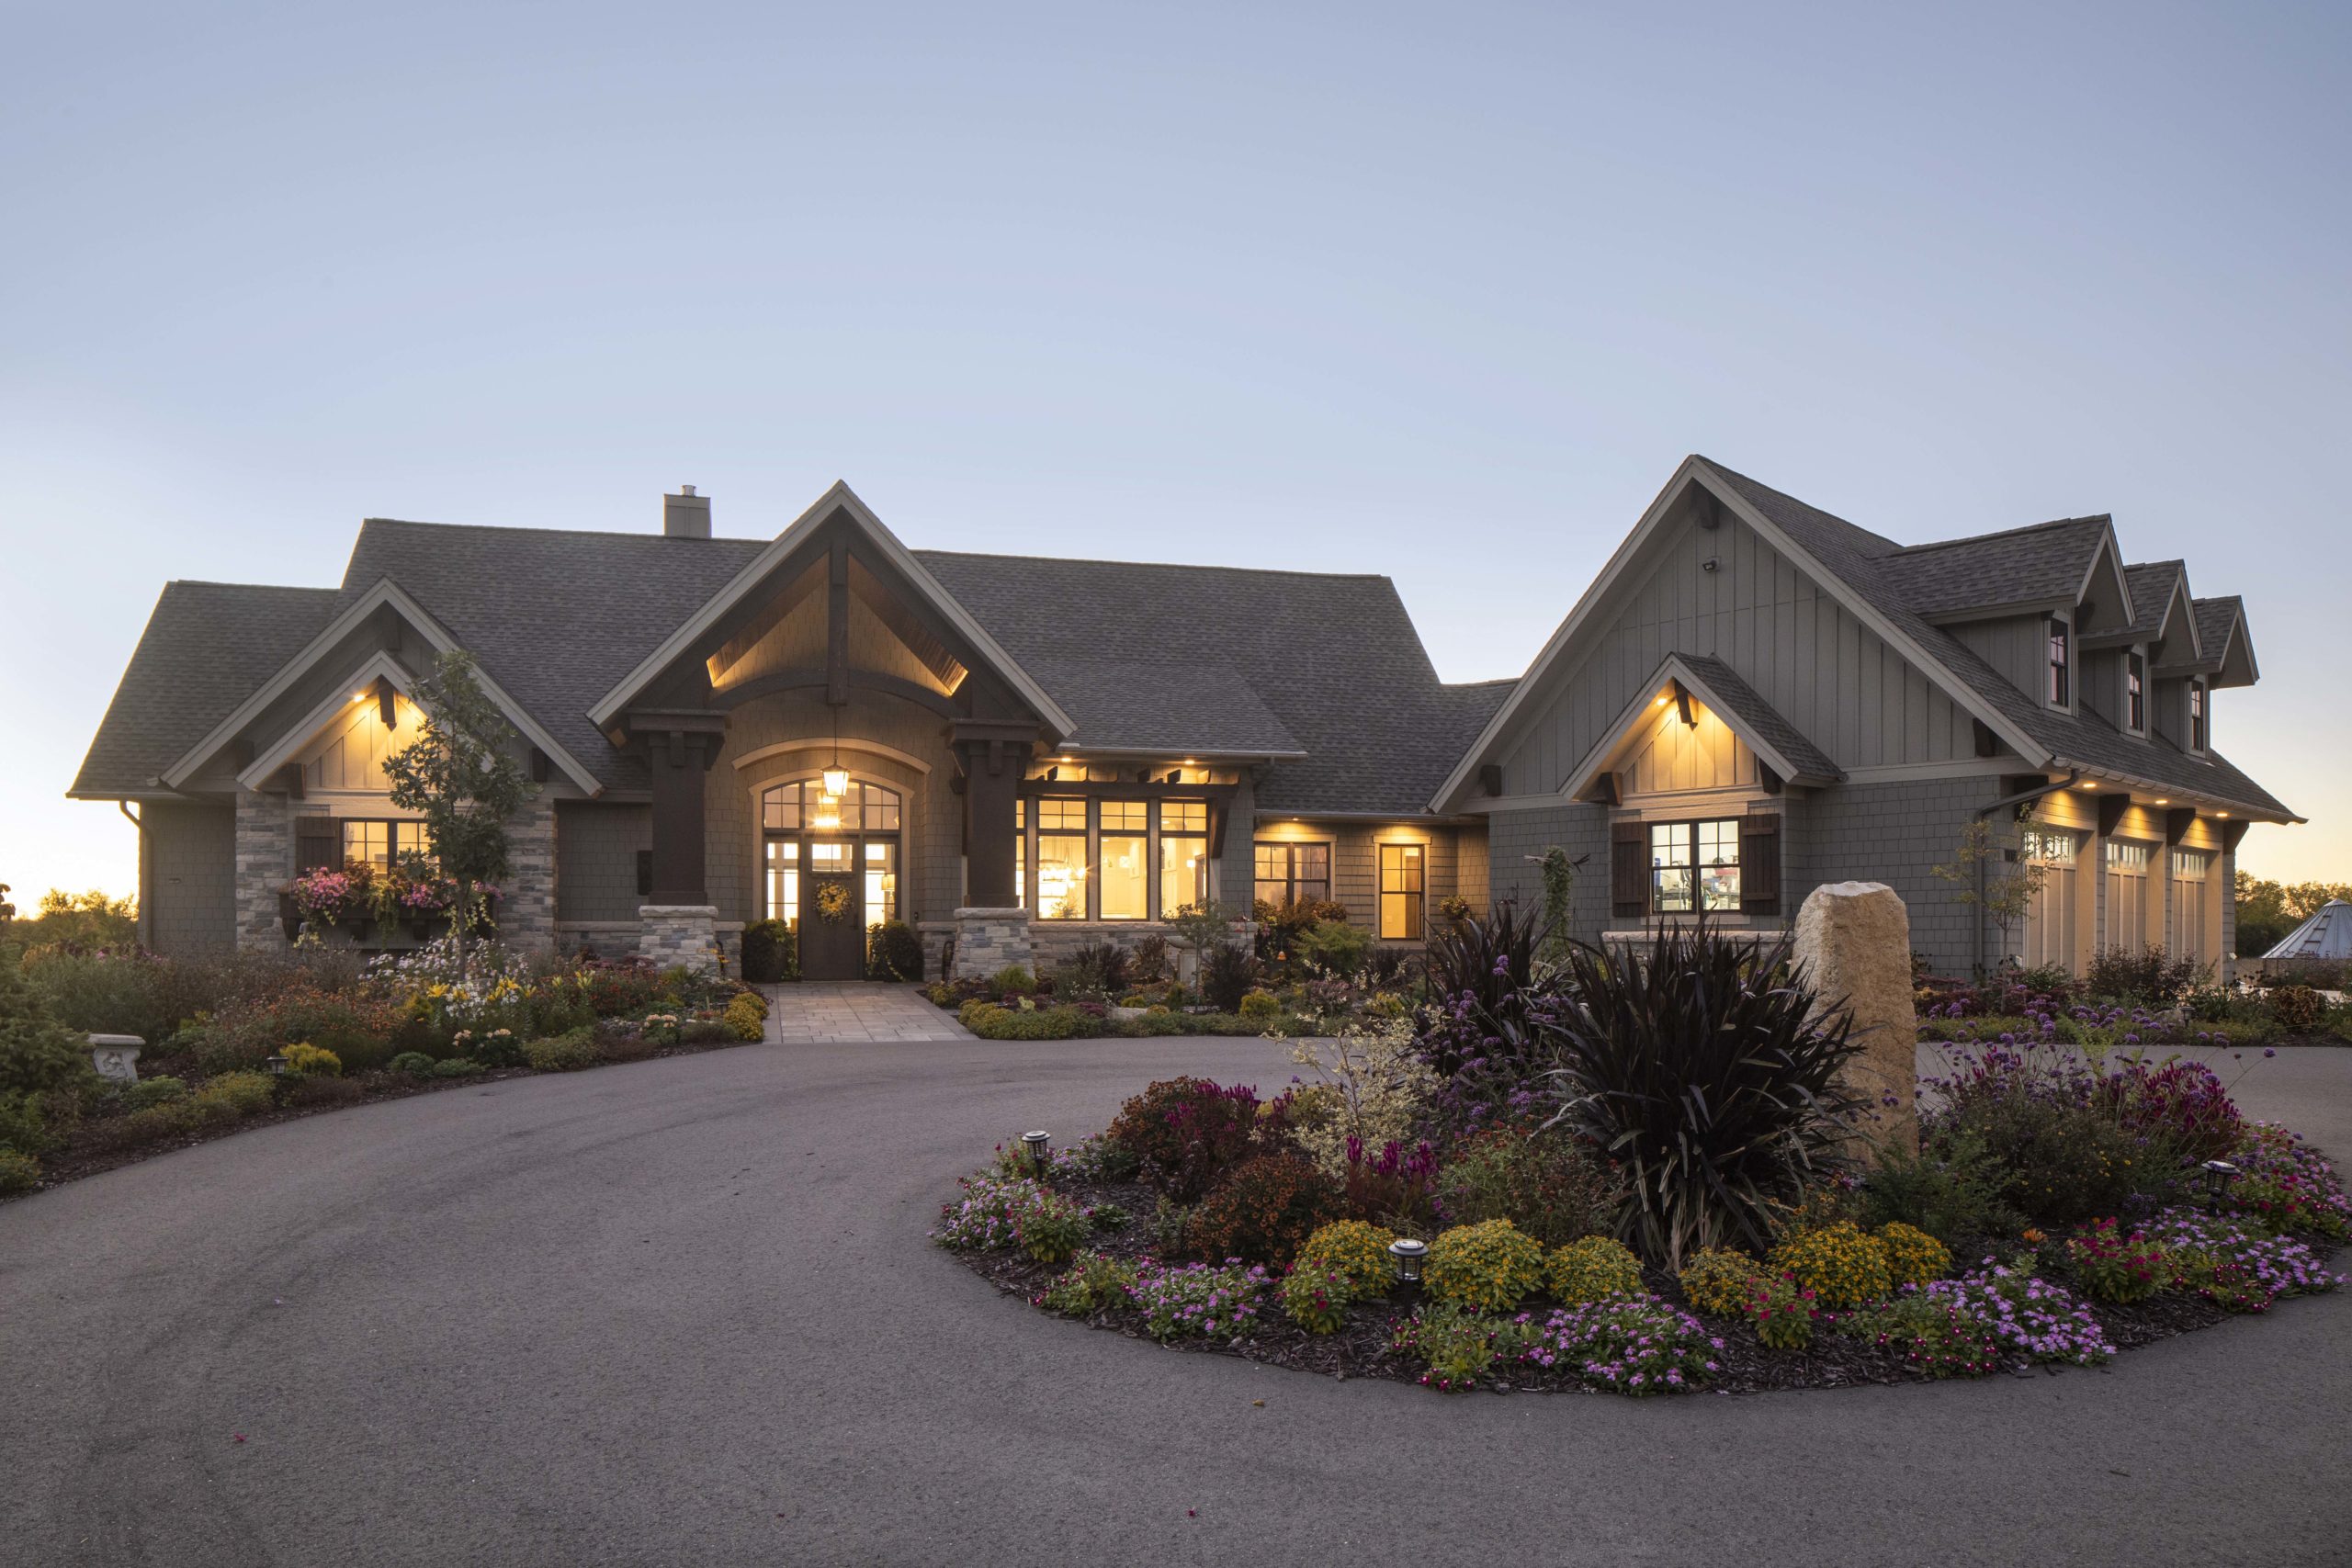 A beautiful prairie transitional custom home with exquisite landscaping and a large driveway.